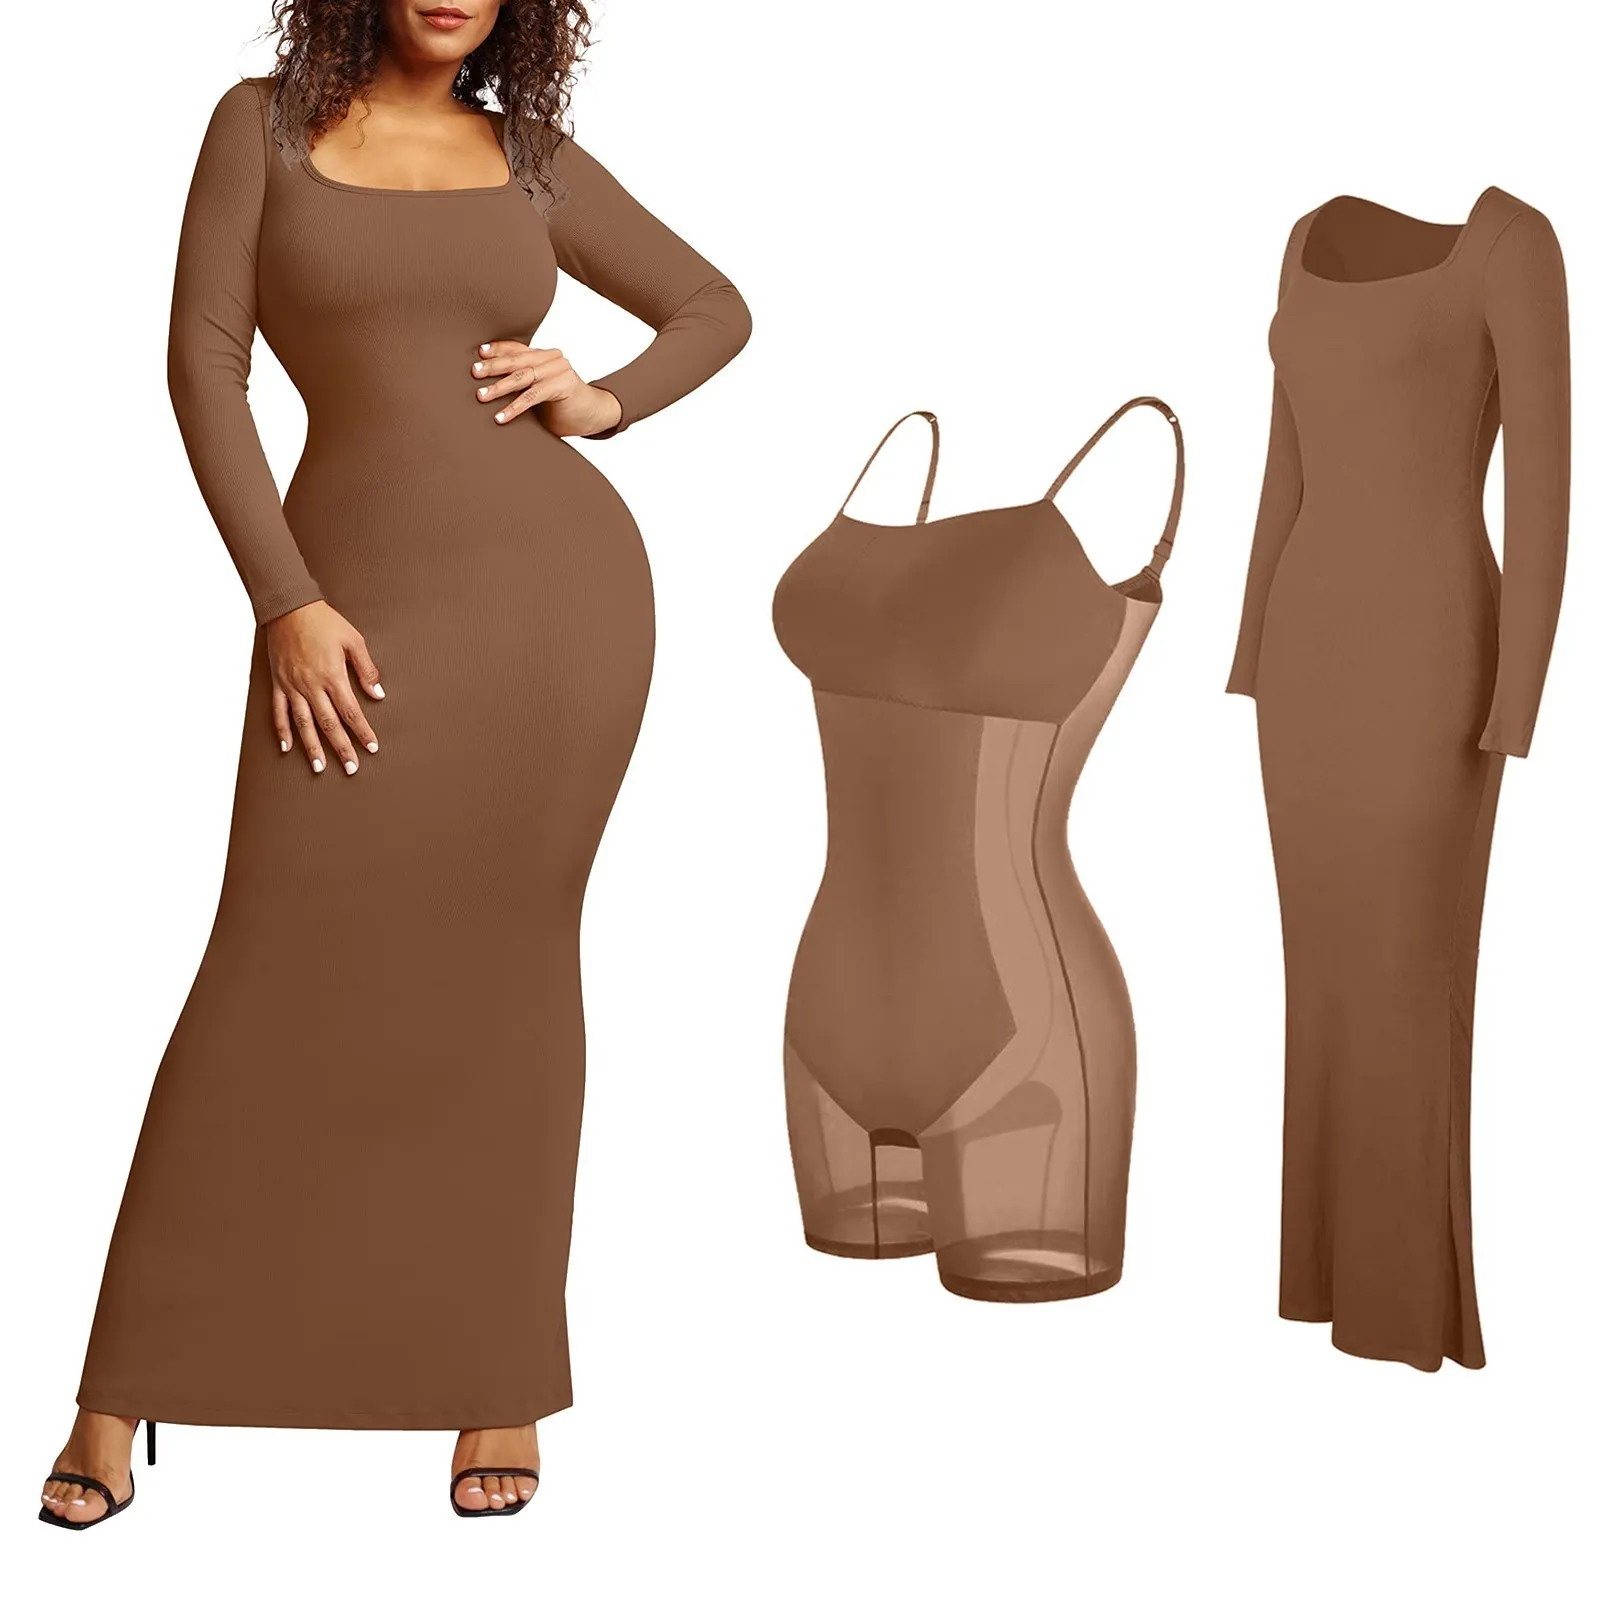 Womens Solid Color Body Shaping Maxi Dress With Built In Shaper